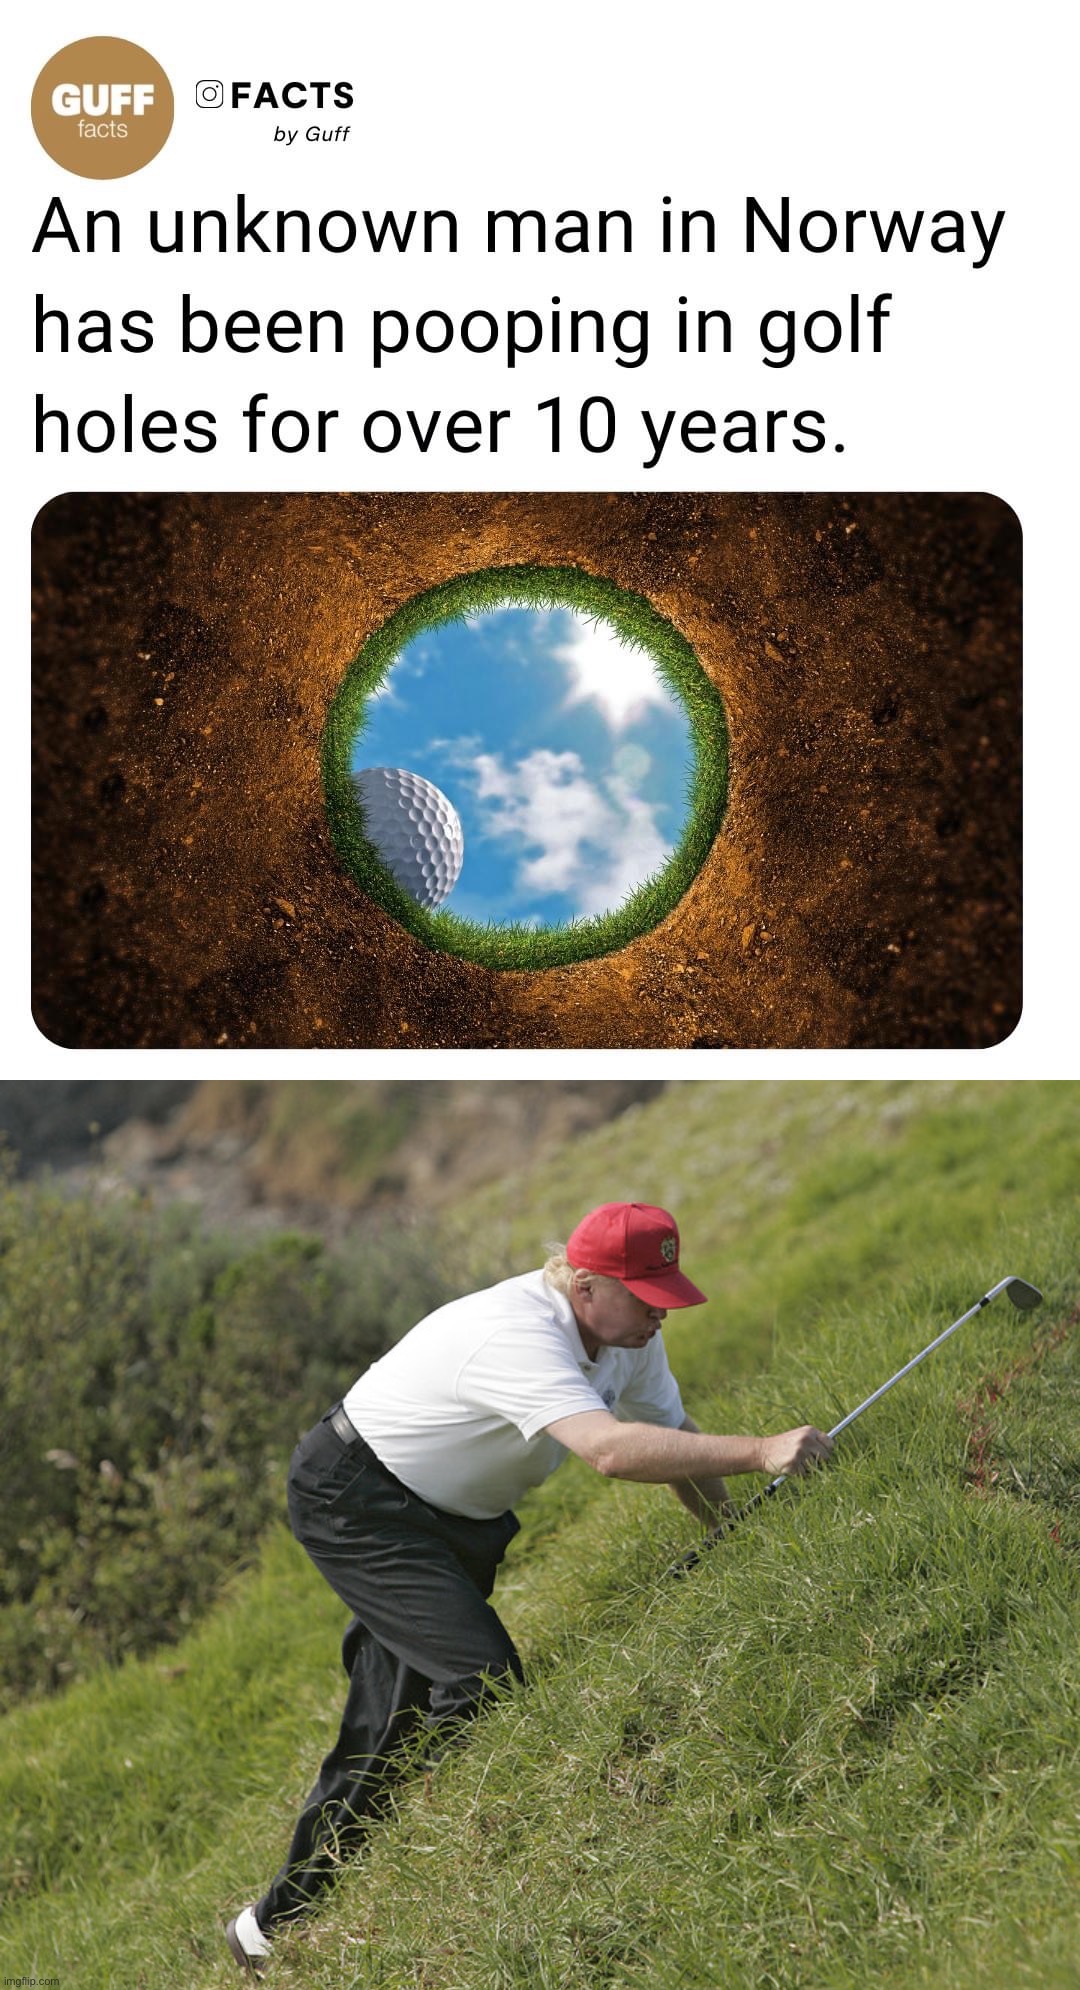 Found him | image tagged in pooping in golf holes,trump golfing | made w/ Imgflip meme maker